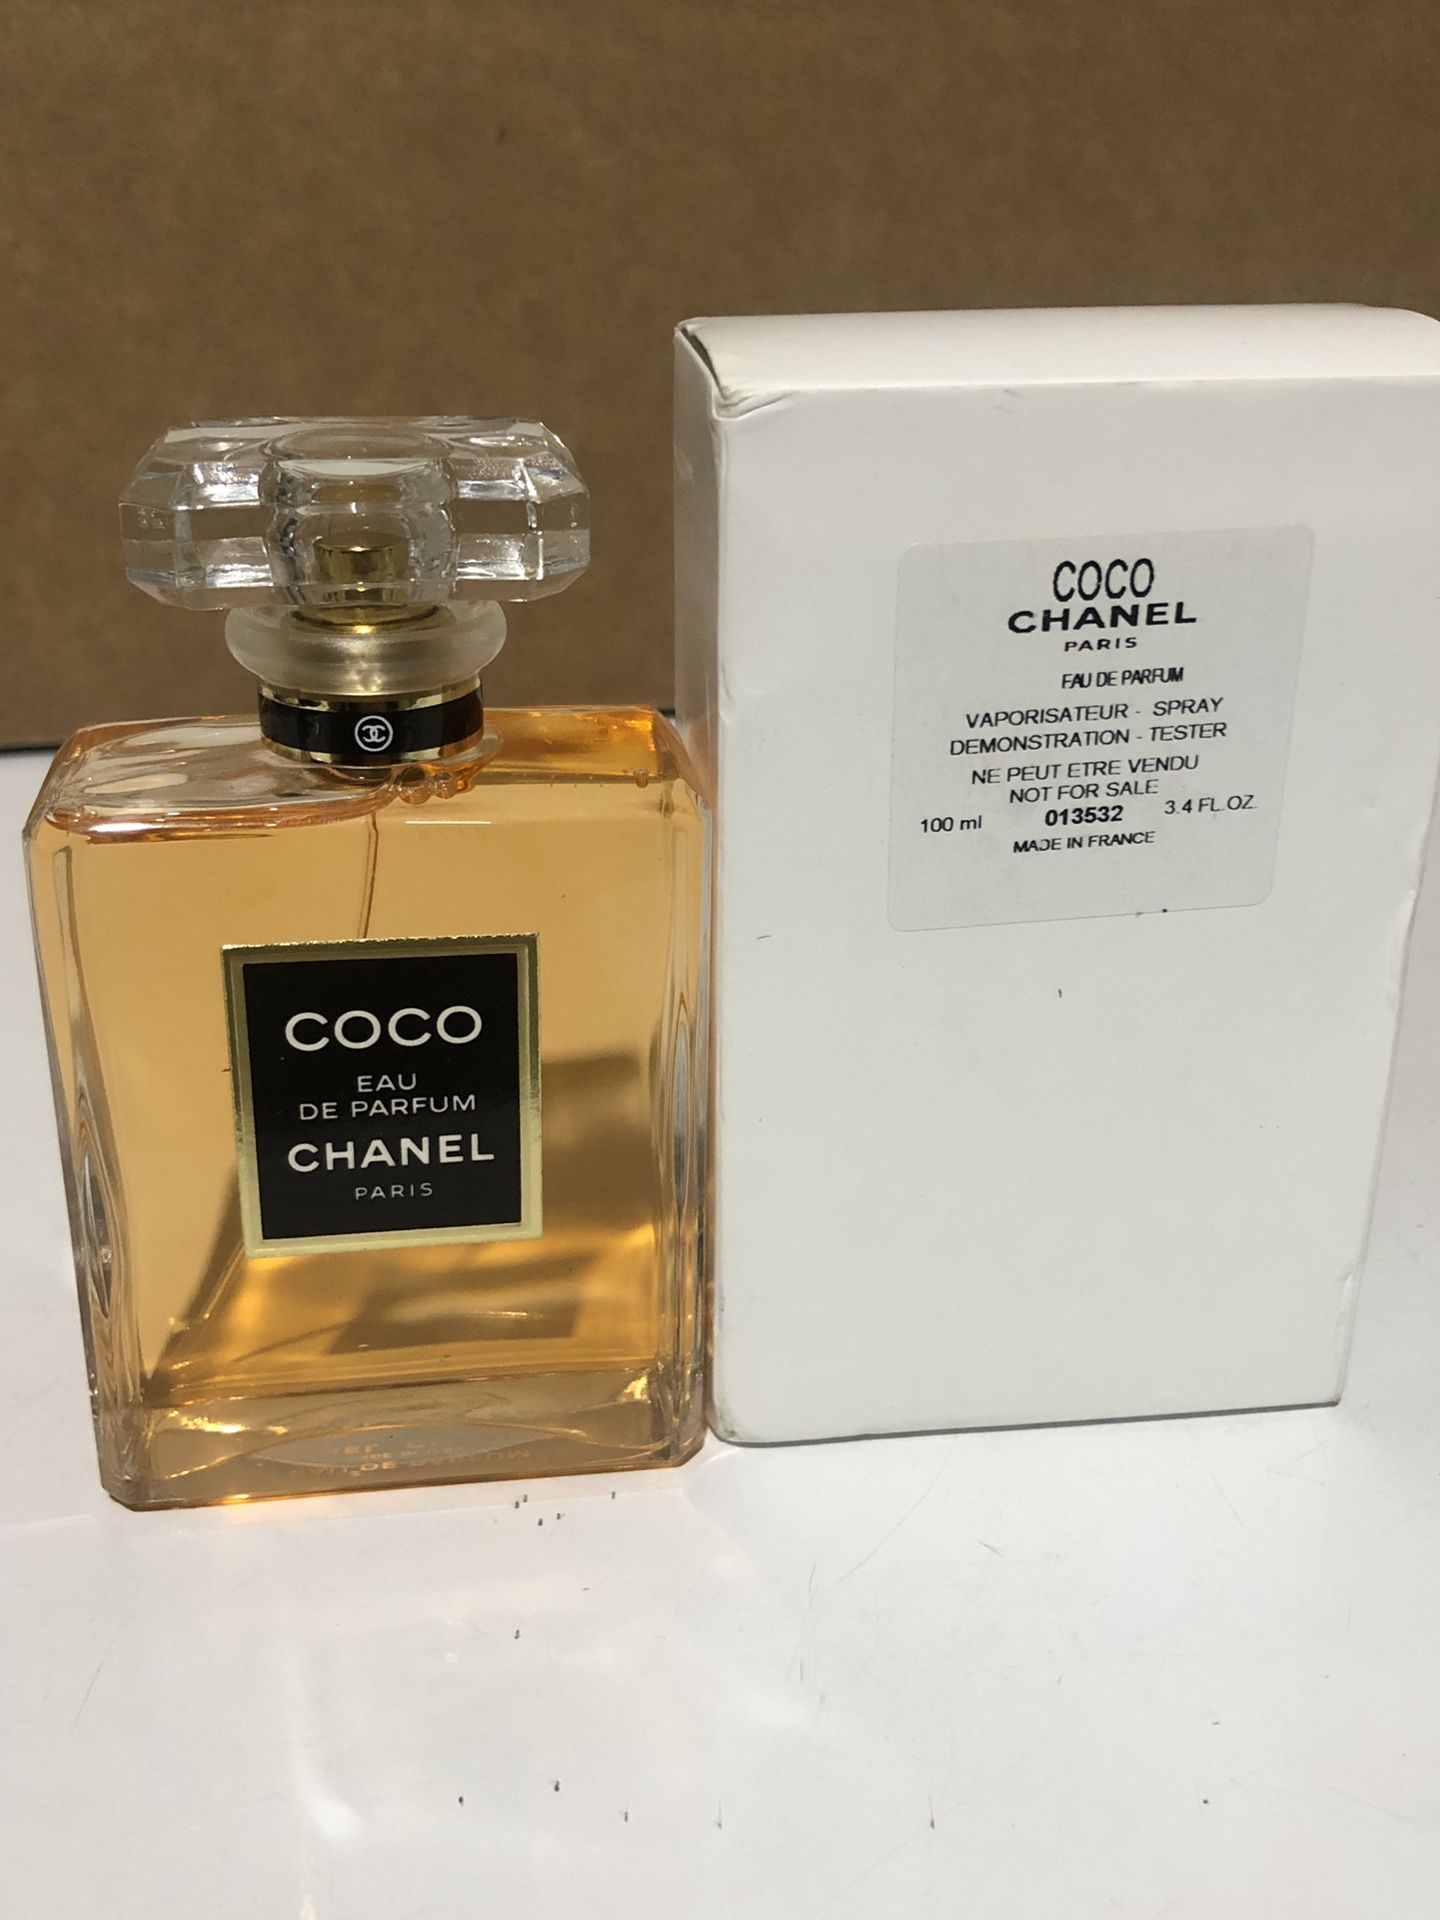 Chanel Mademoiselle Eau De Parfum 3.4oz Tester w/ Tester Box (BRAND NEW)  100% AUTHENTIC! READY TO SHIP! PERFUME for Sale in Philadelphia, PA -  OfferUp